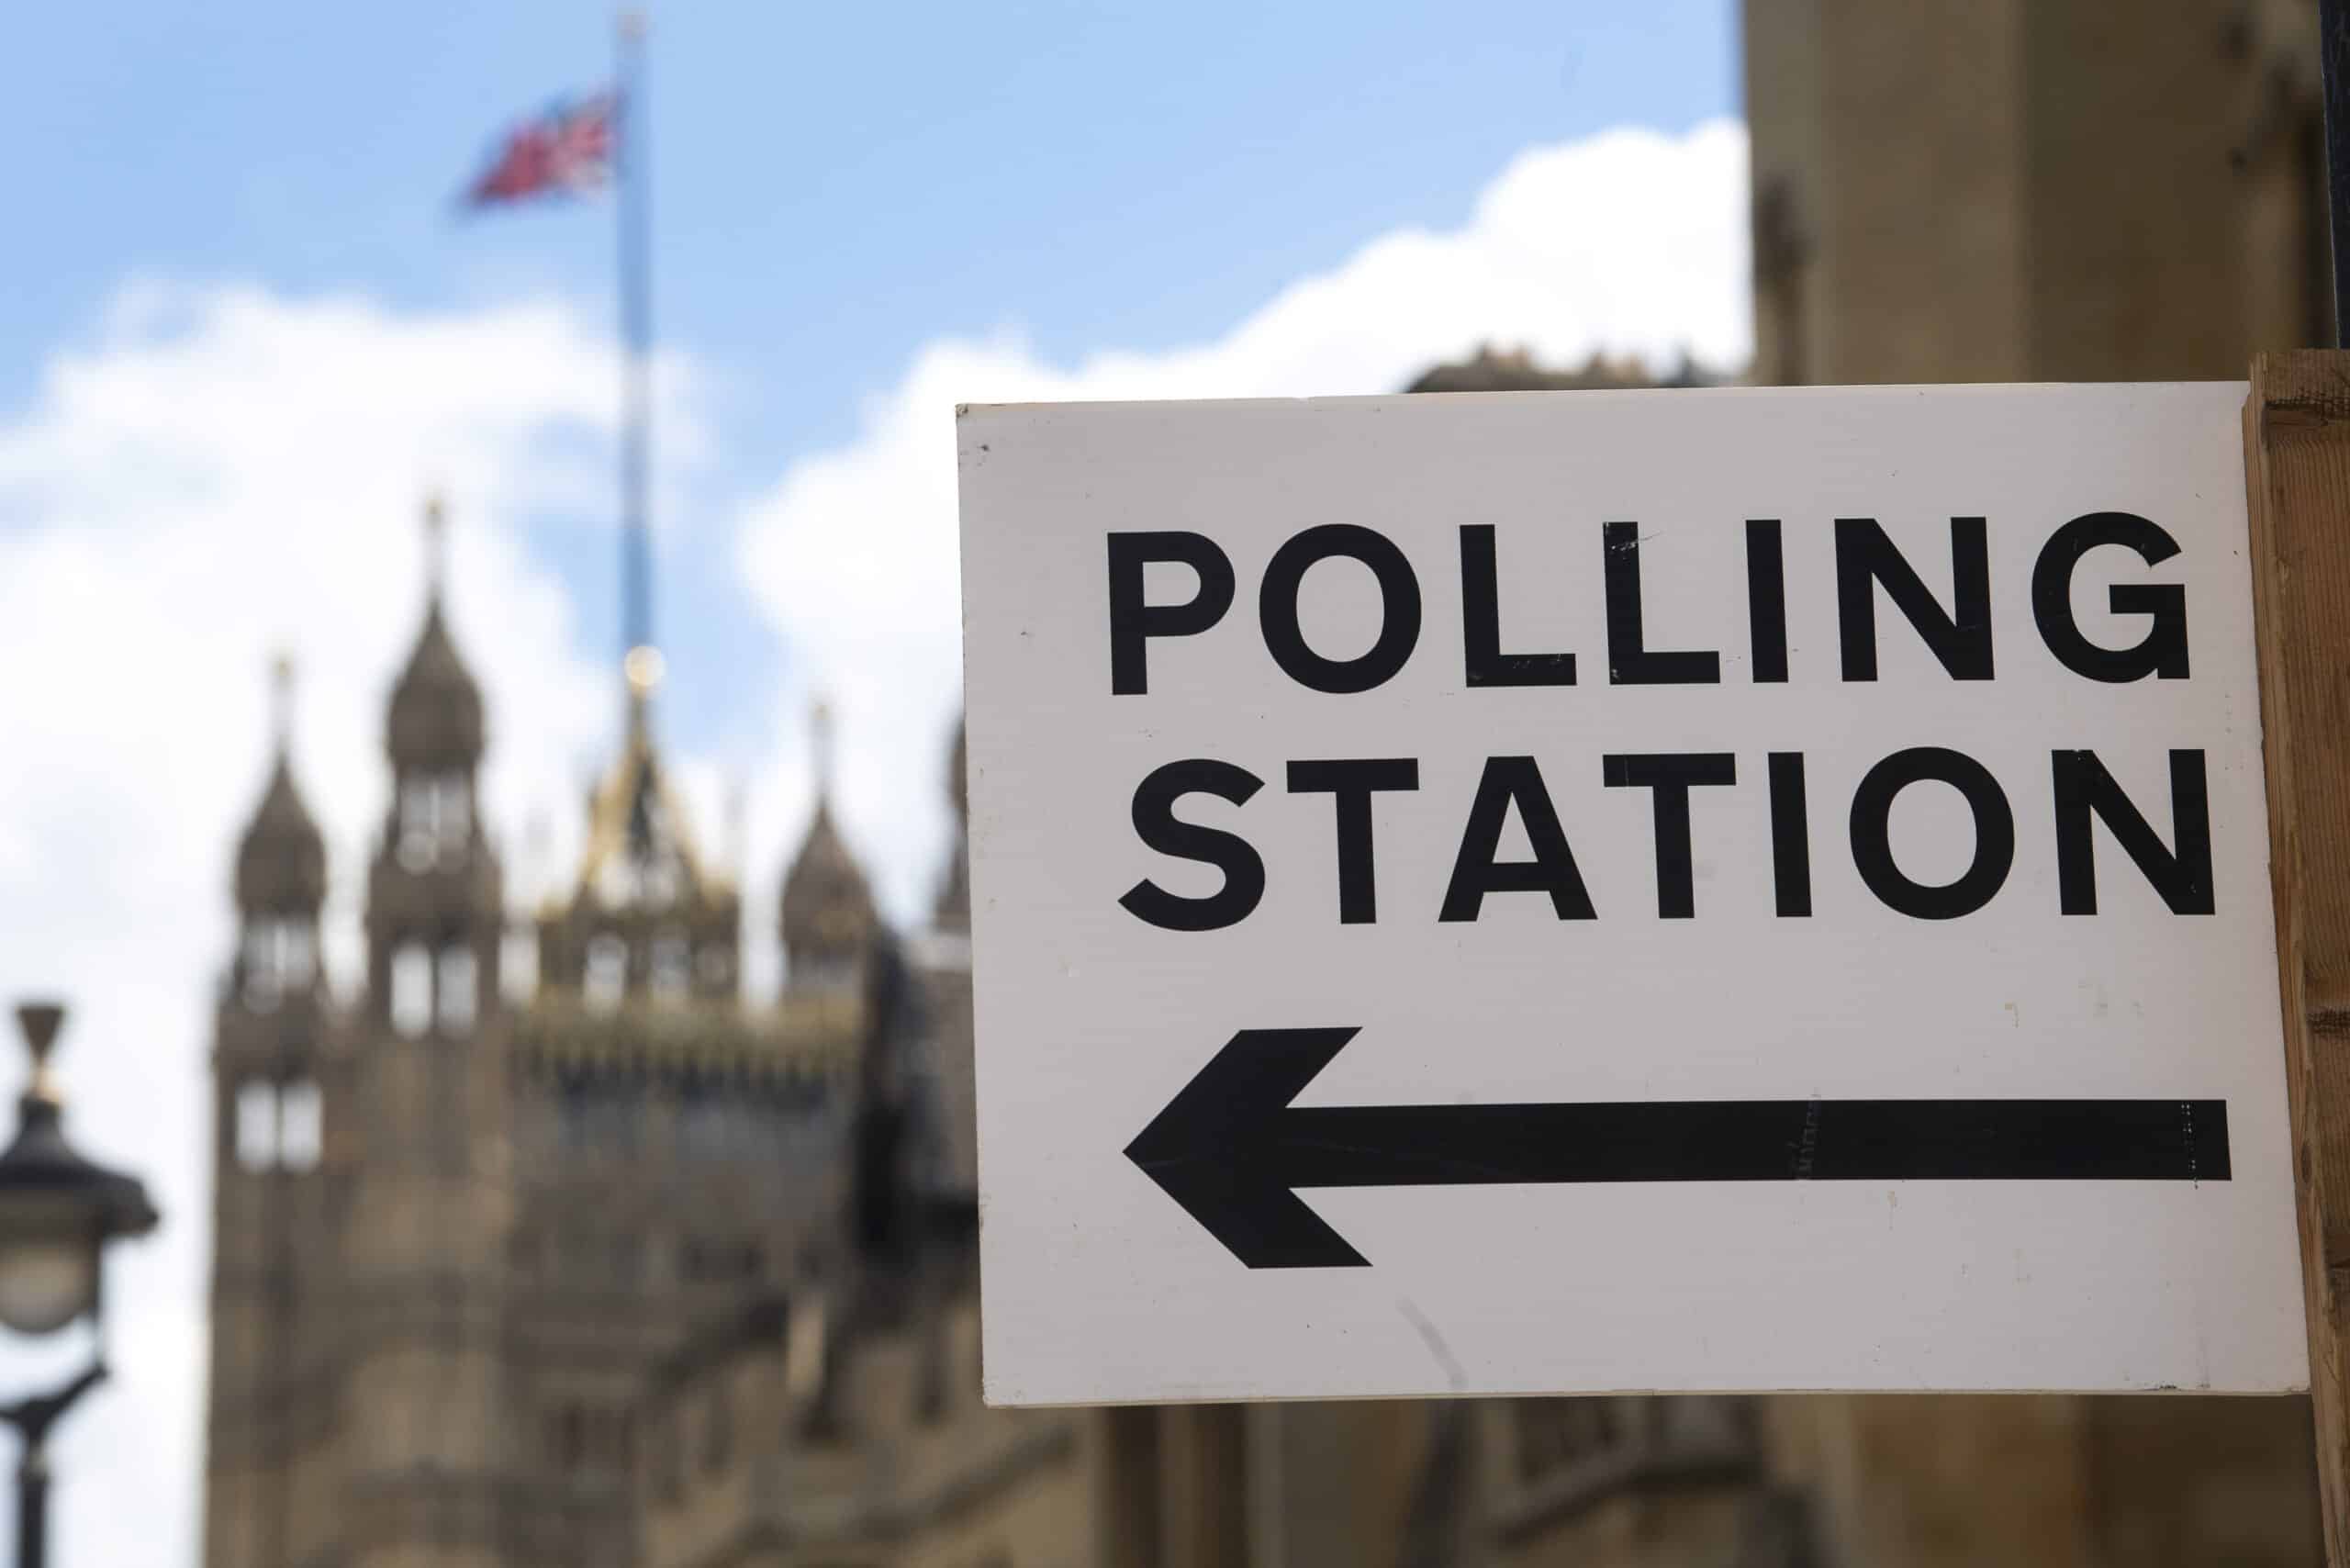 THREE-QUARTERS of Brits want a General Election before May